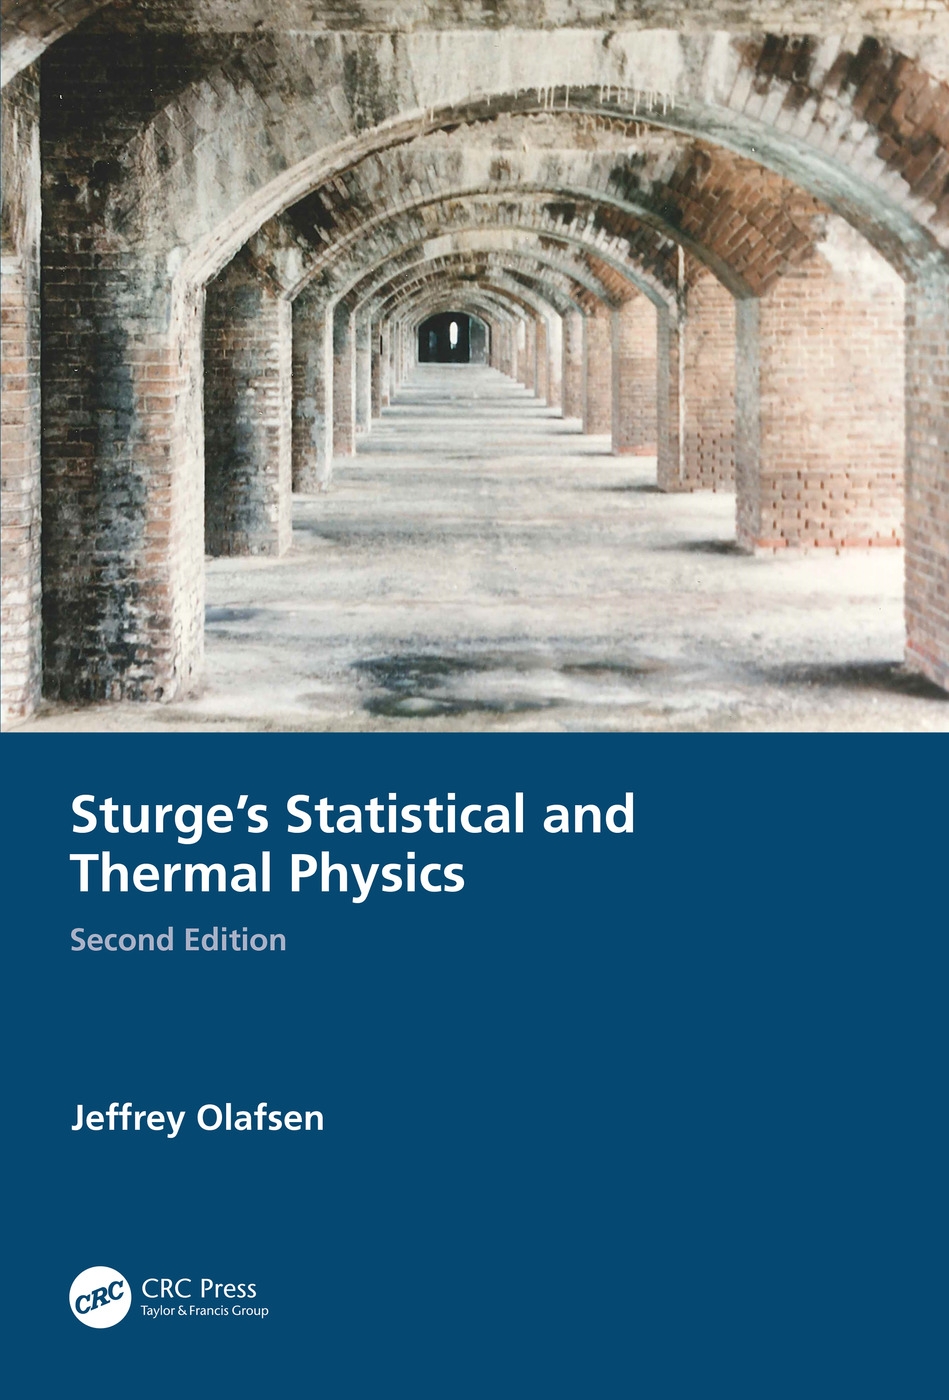 Sturge’s Statistical and Thermal Physics, Second Edition